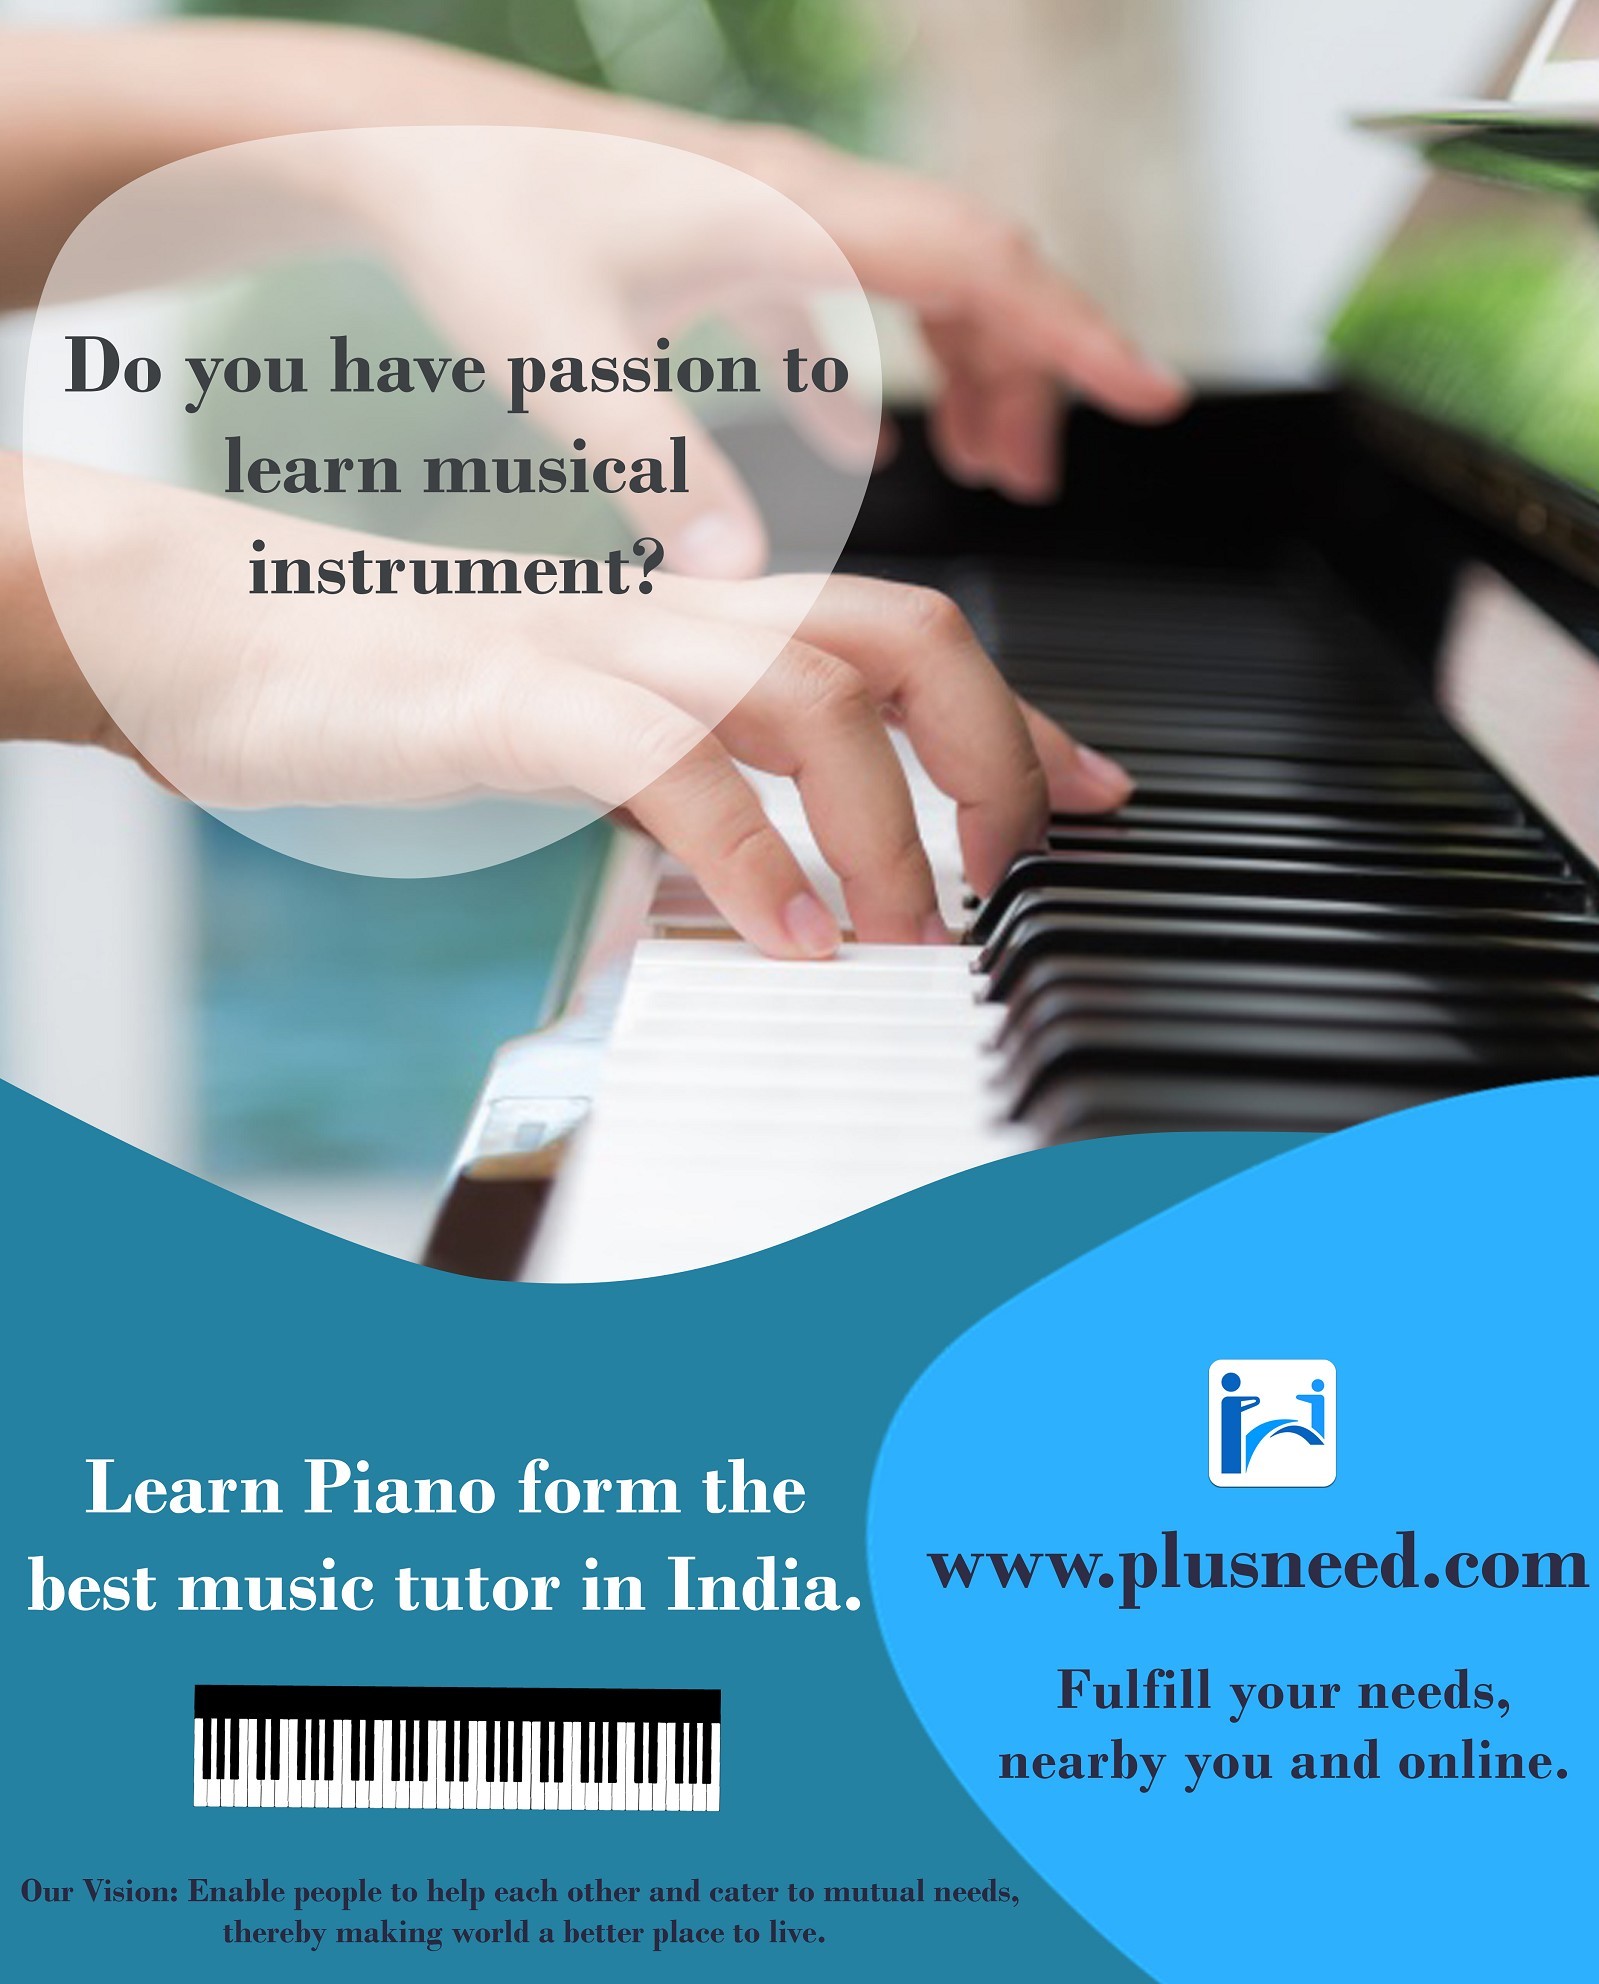 Do you have a passion to learn Piano?